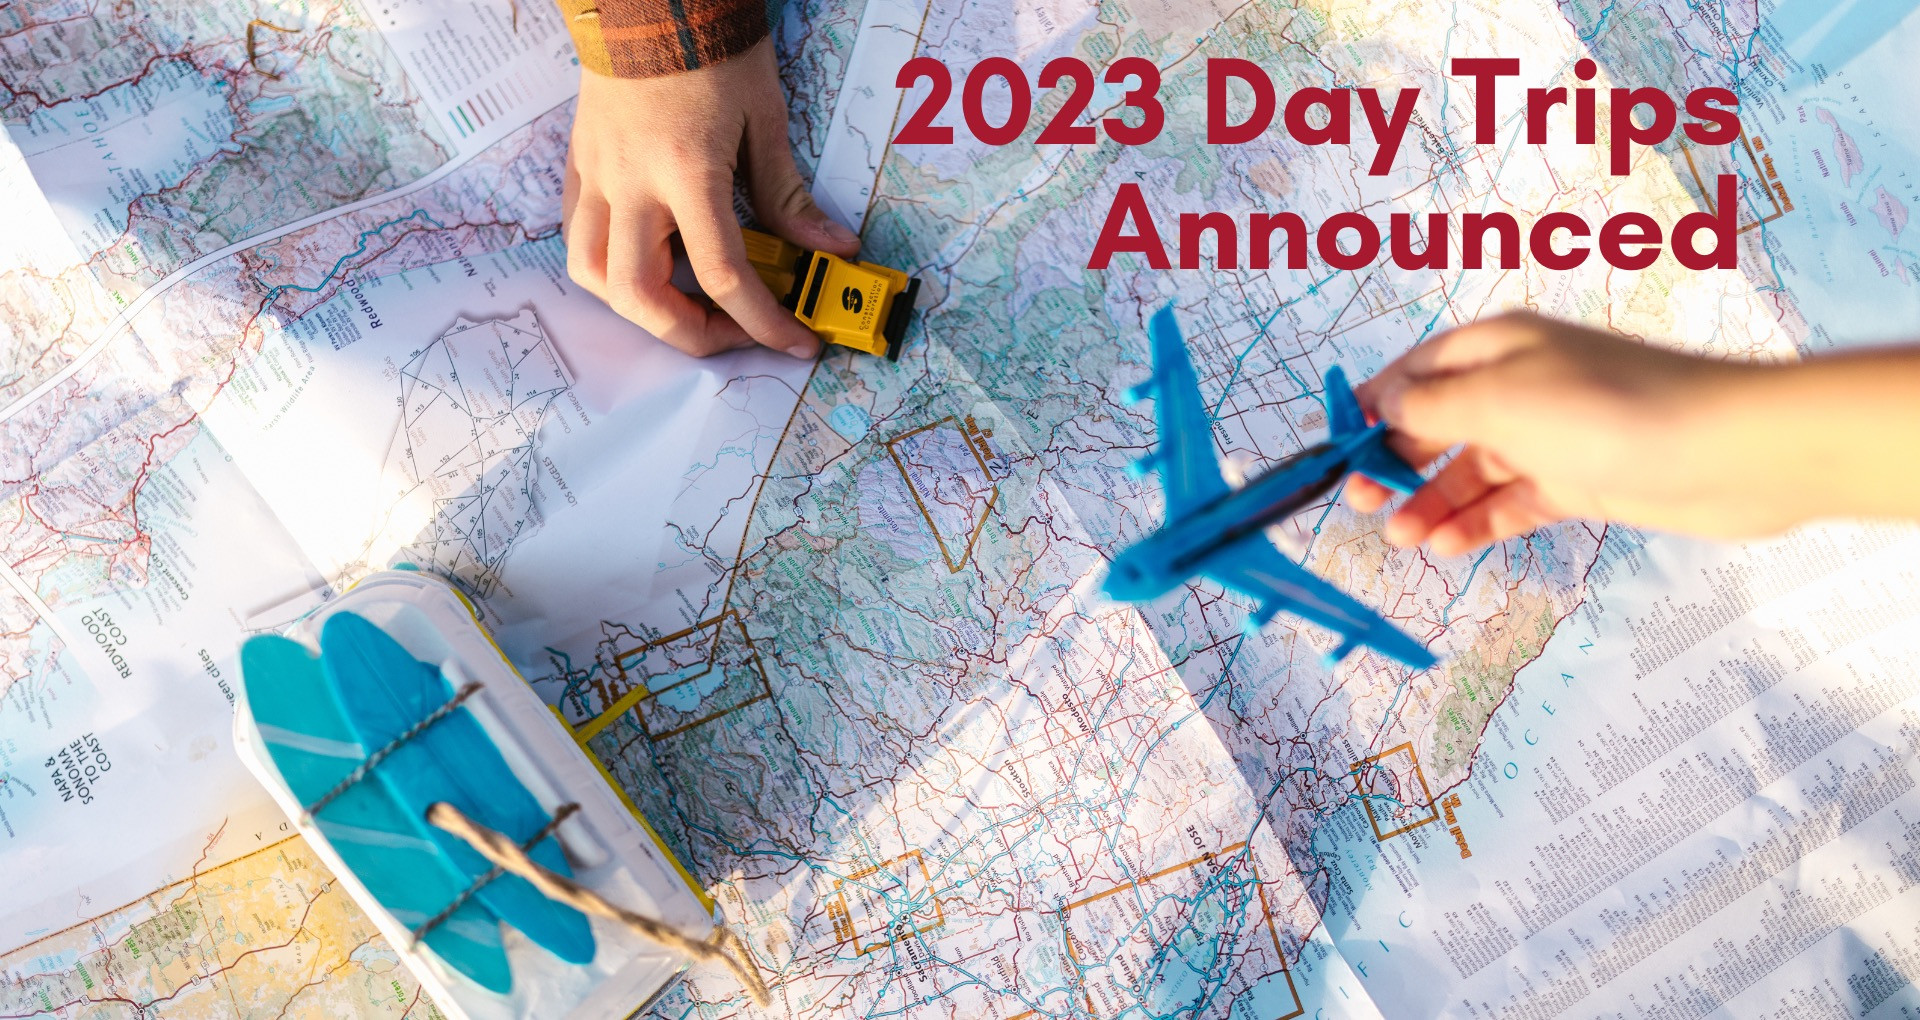 2023 Day Trips Announced